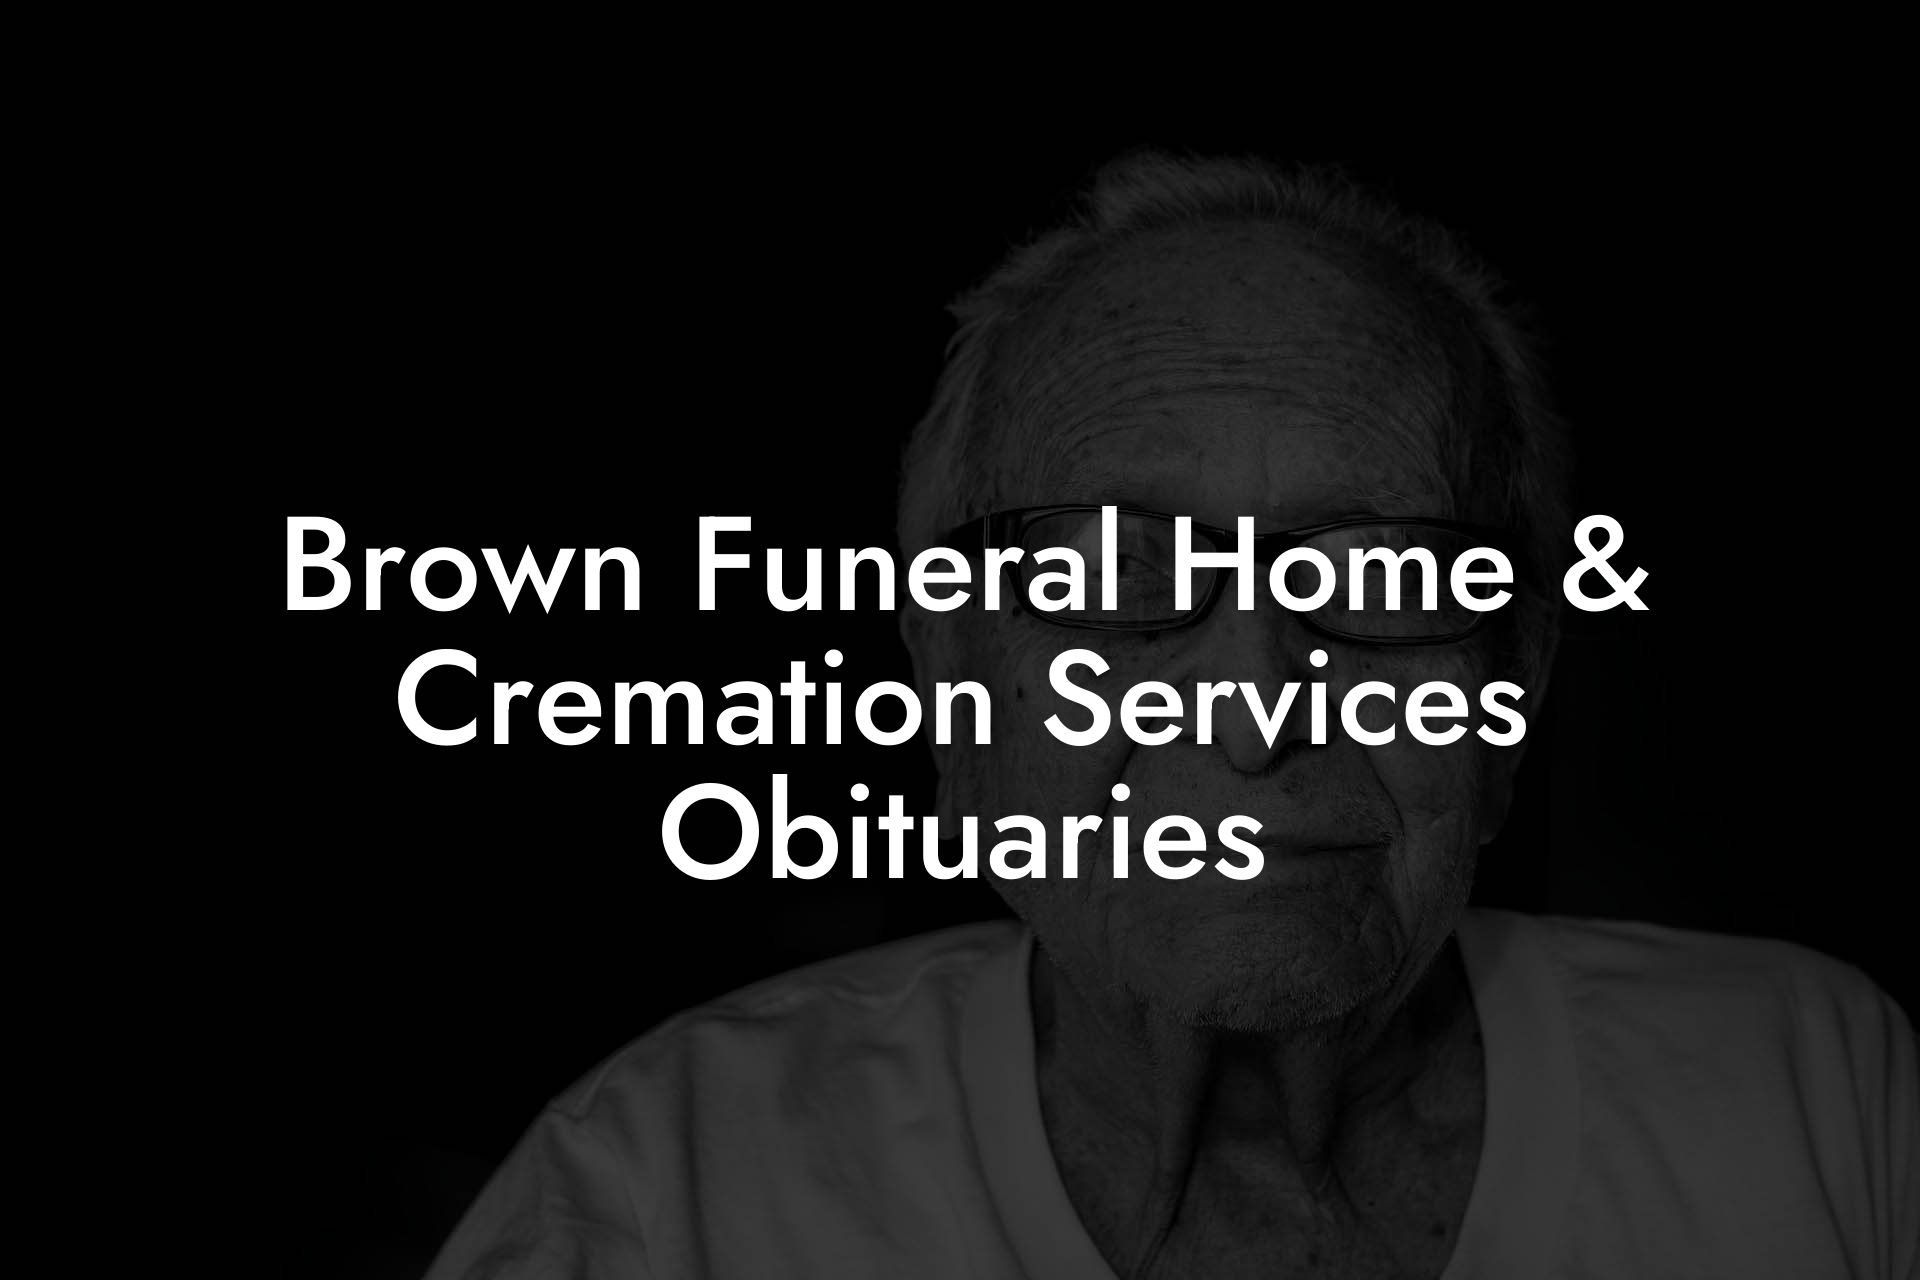 Brown Funeral Home & Cremation Services Obituaries